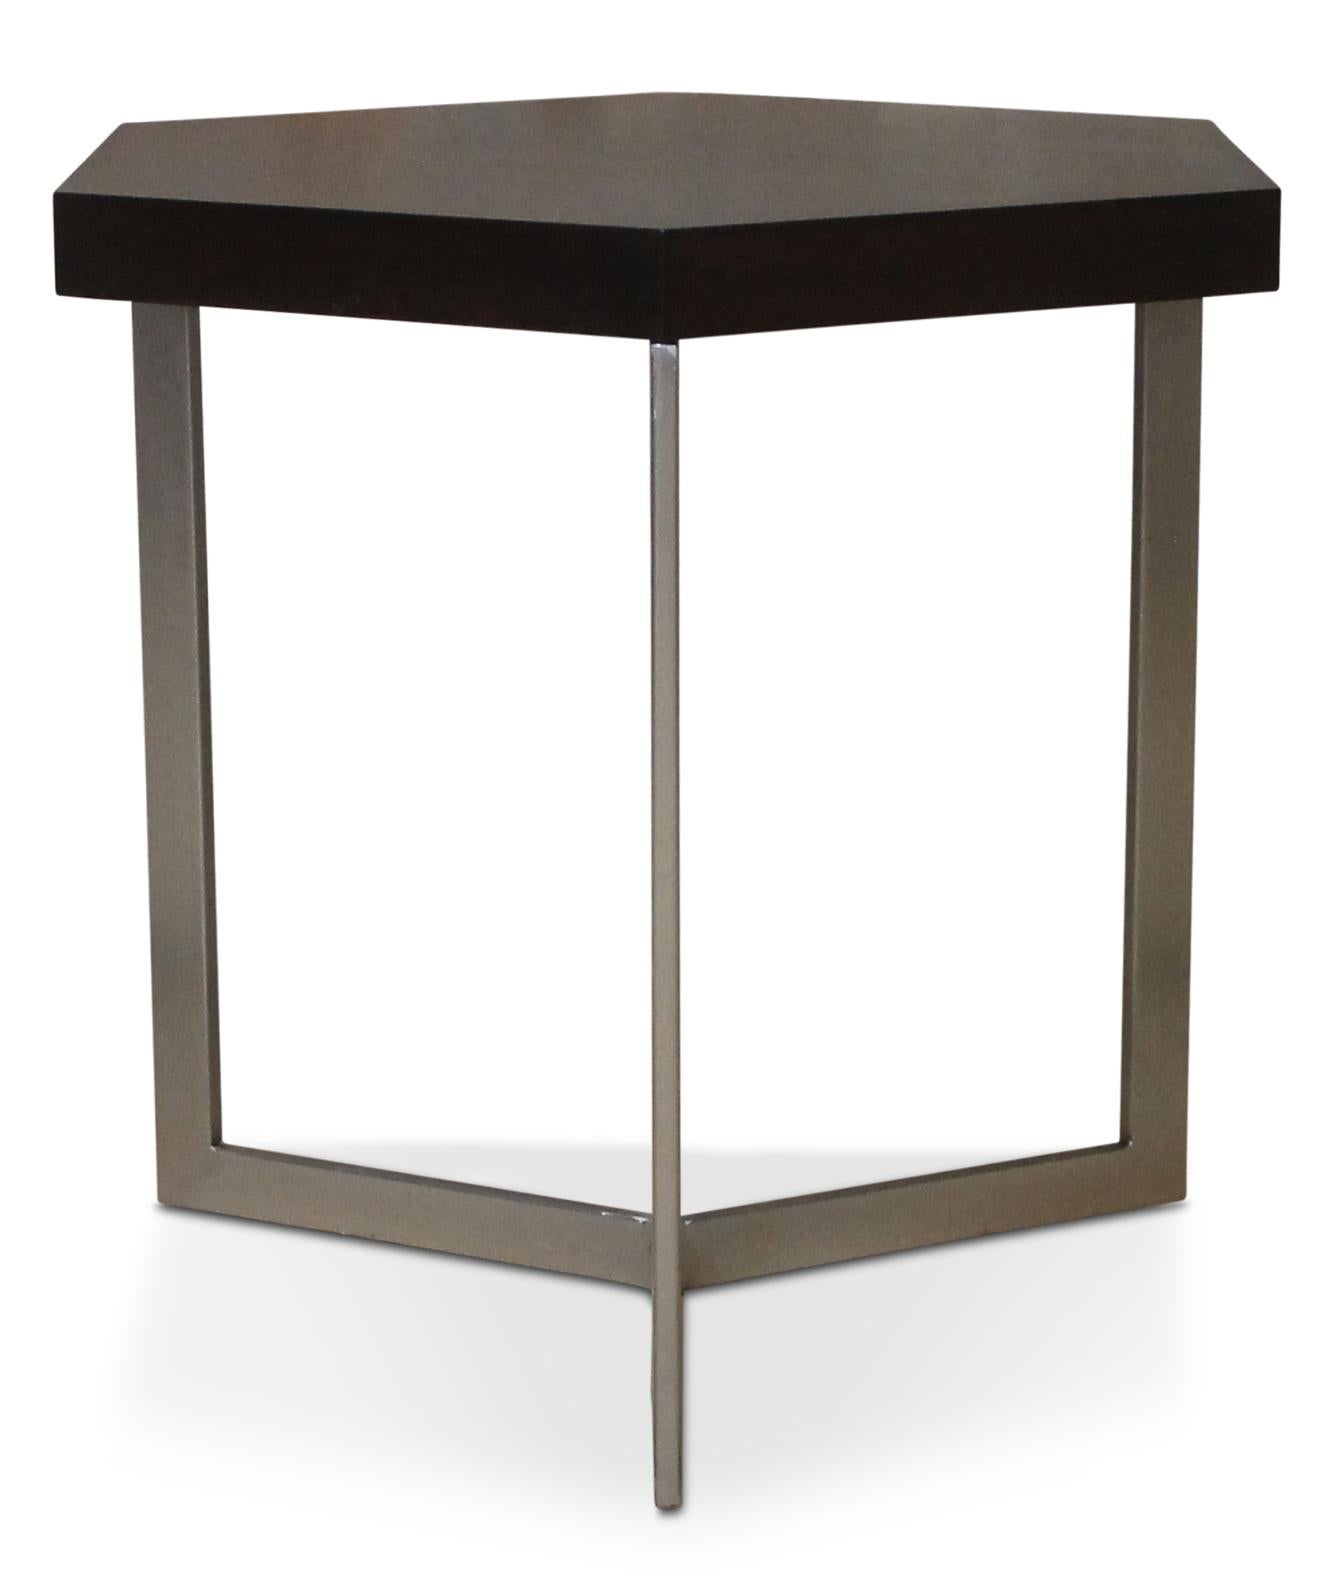 Argentine Modern Hexagonal Side Table in Steel and Rosewood from Costantini, Nicoli For Sale